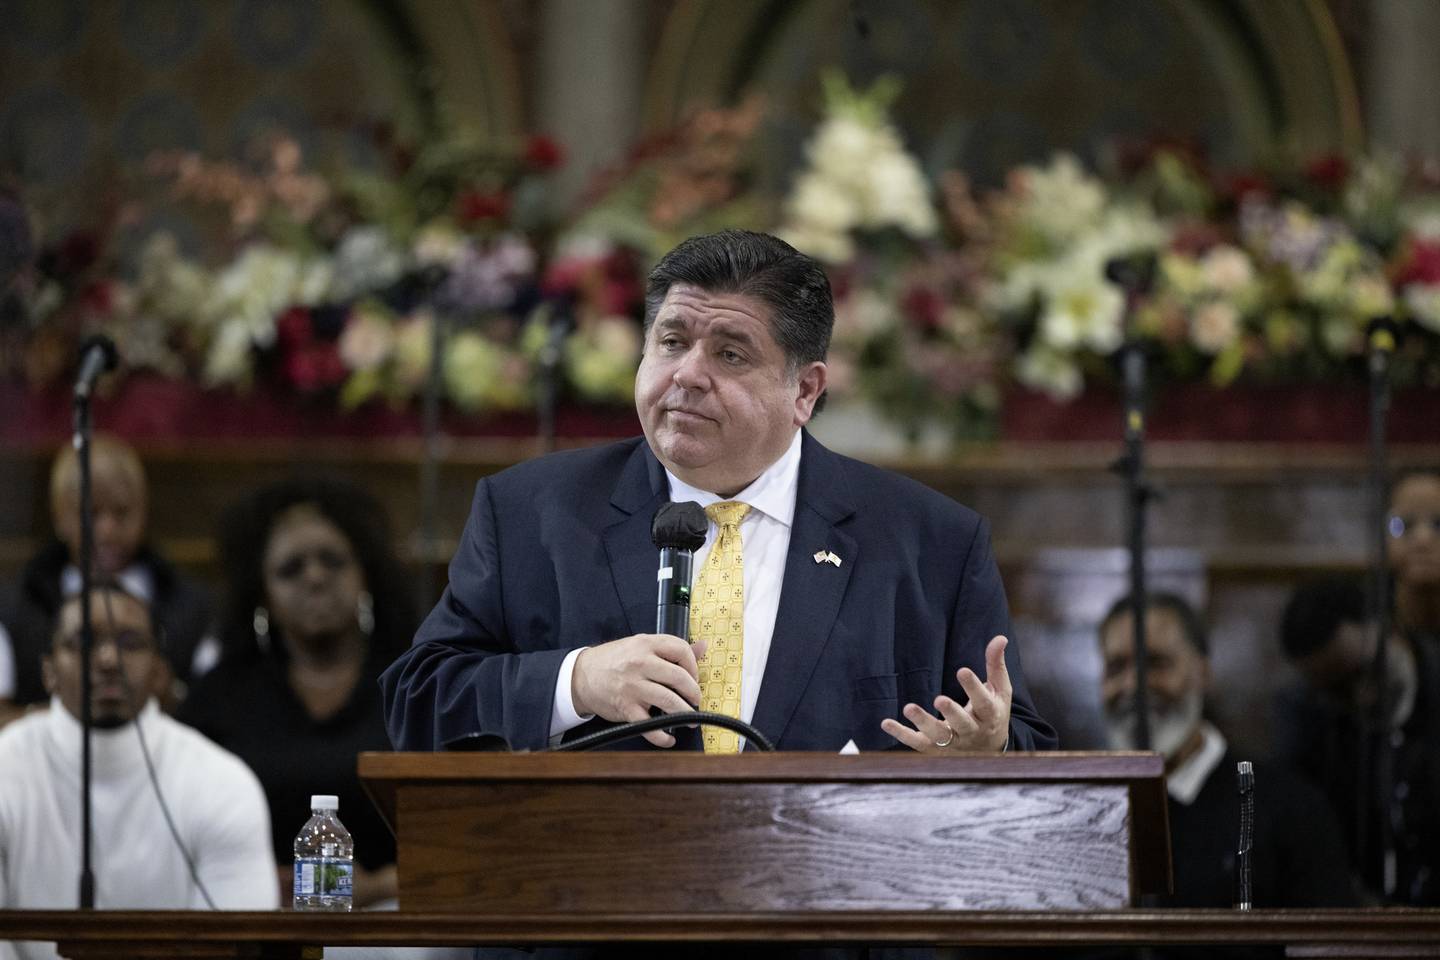 Gov J.B. Pritzker joins Dr. Marshall Elijah Hatch and his congregation during a service on the final weekend before Election Day on Nov. 6, 2022, at New Mount Pilgrim Missionary Baptist Church in East Garfield Park in Chicago.